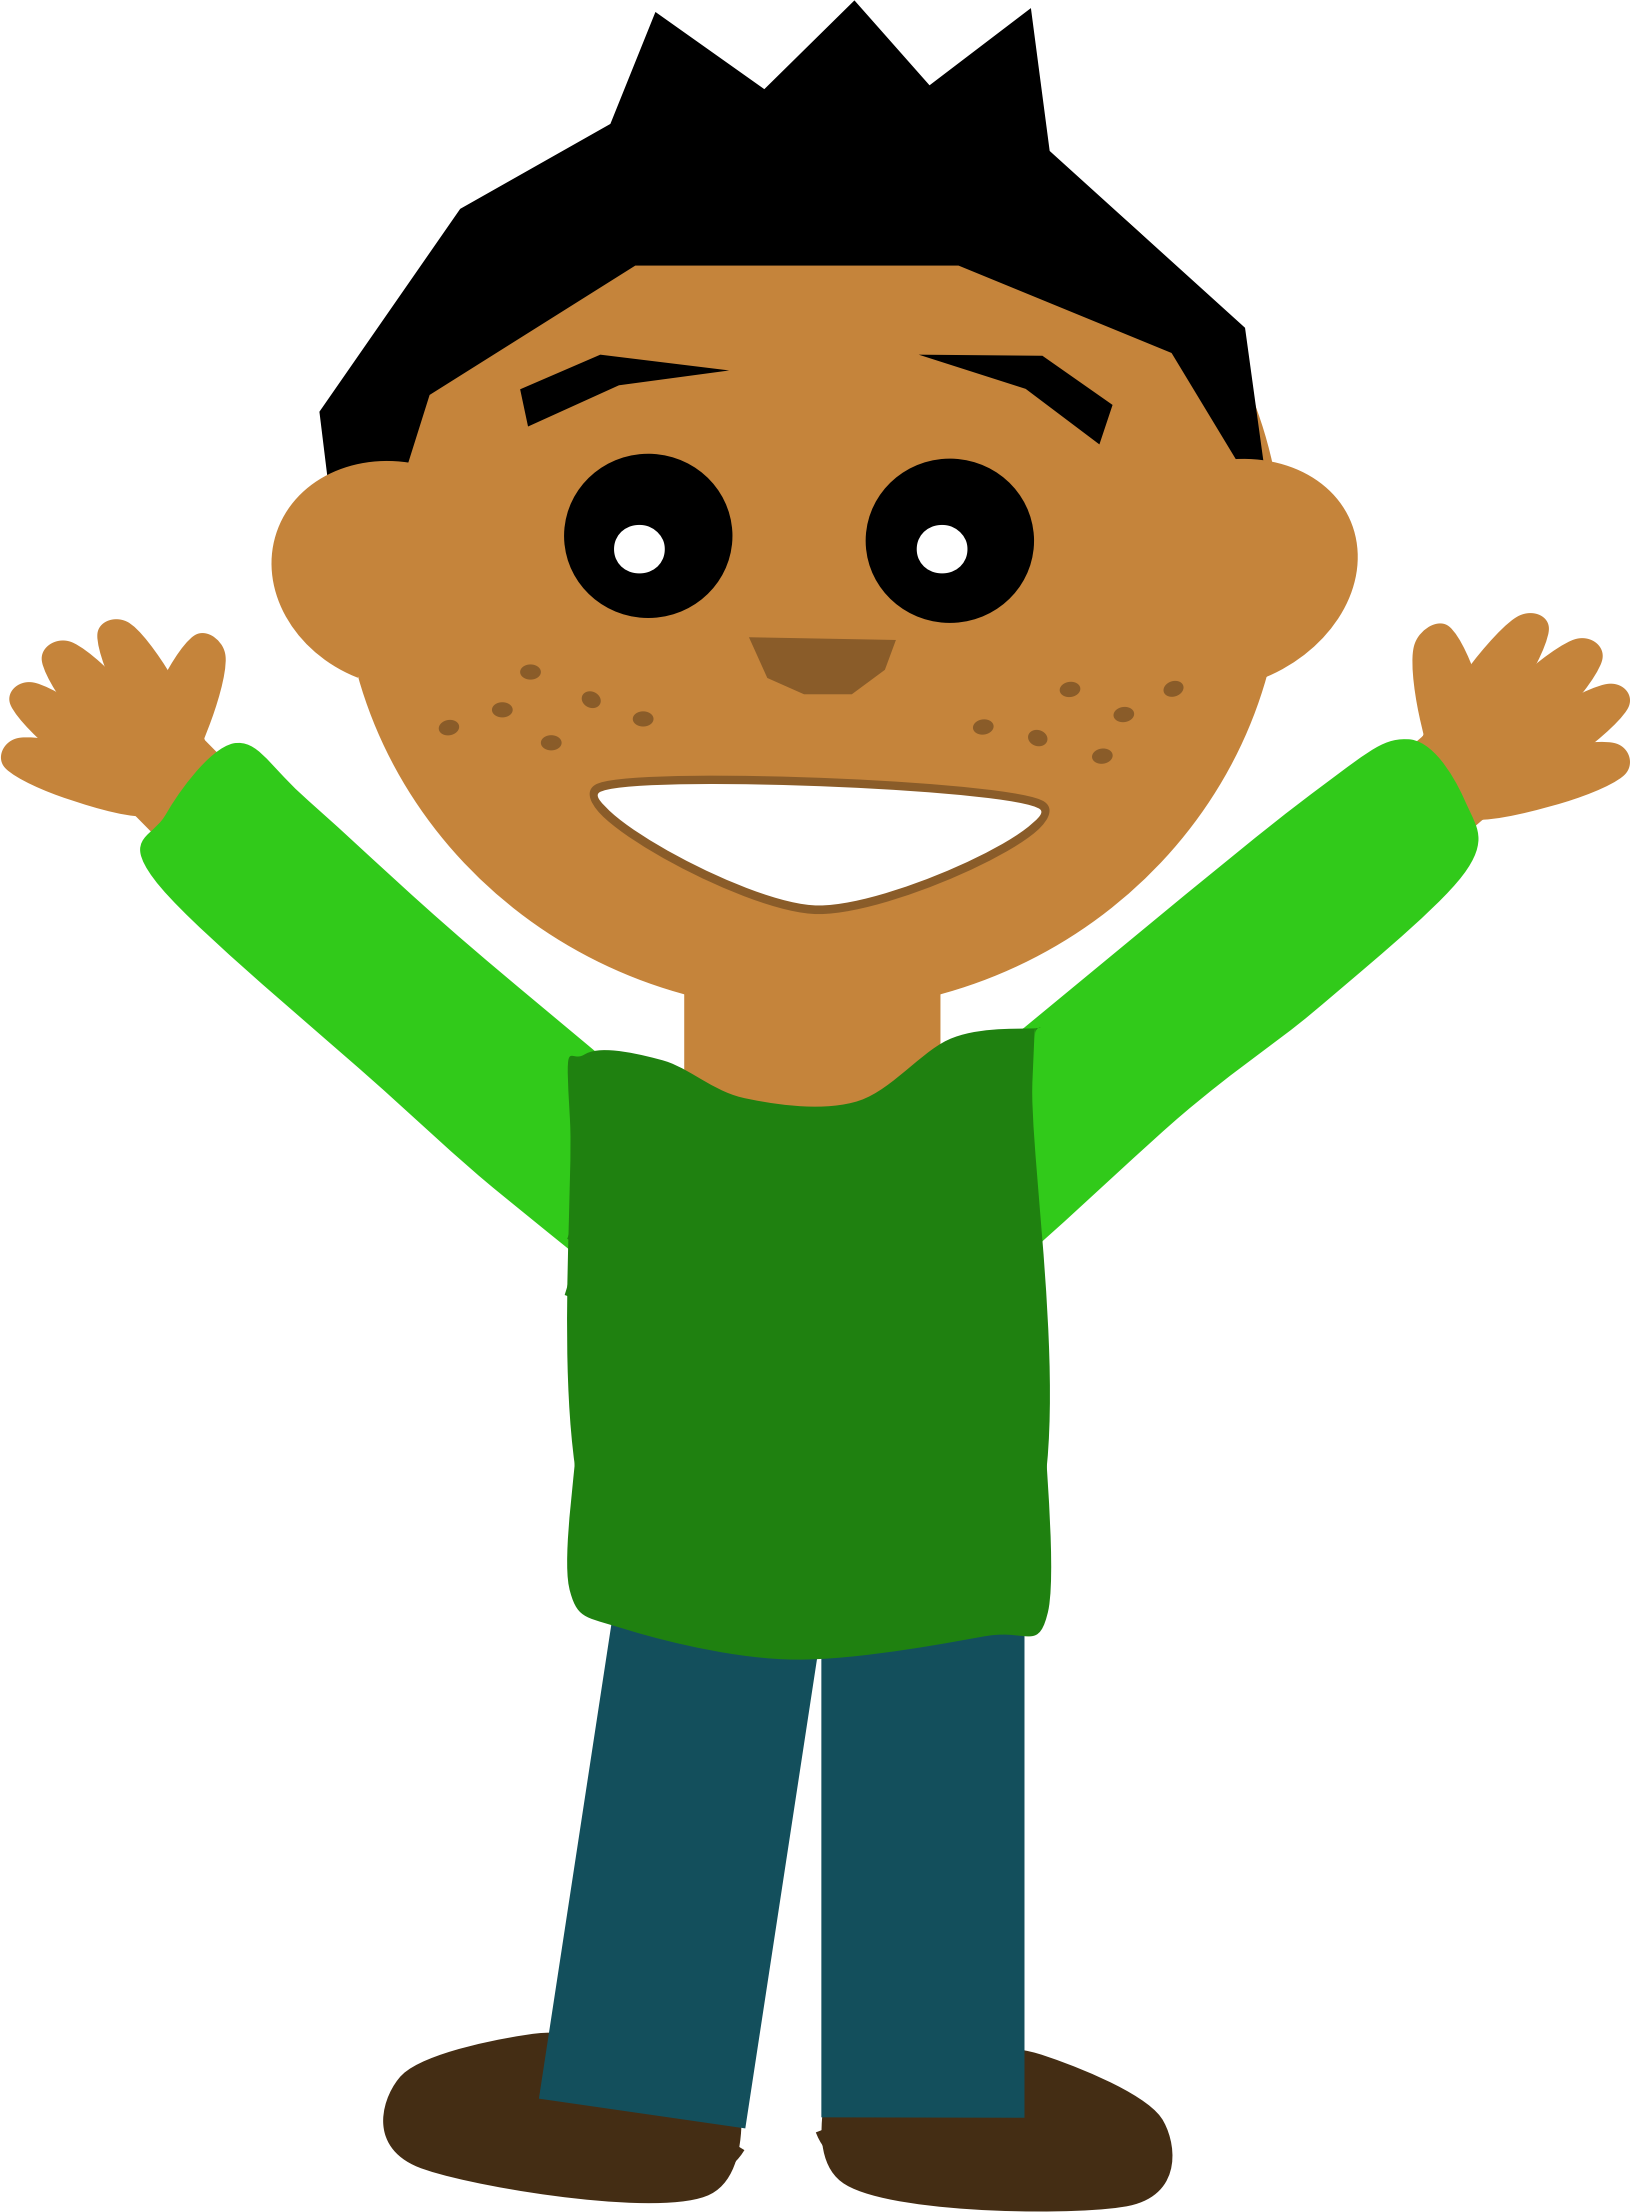 Happy Guy Png - Big Image (Png), Transparent background PNG HD thumbnail